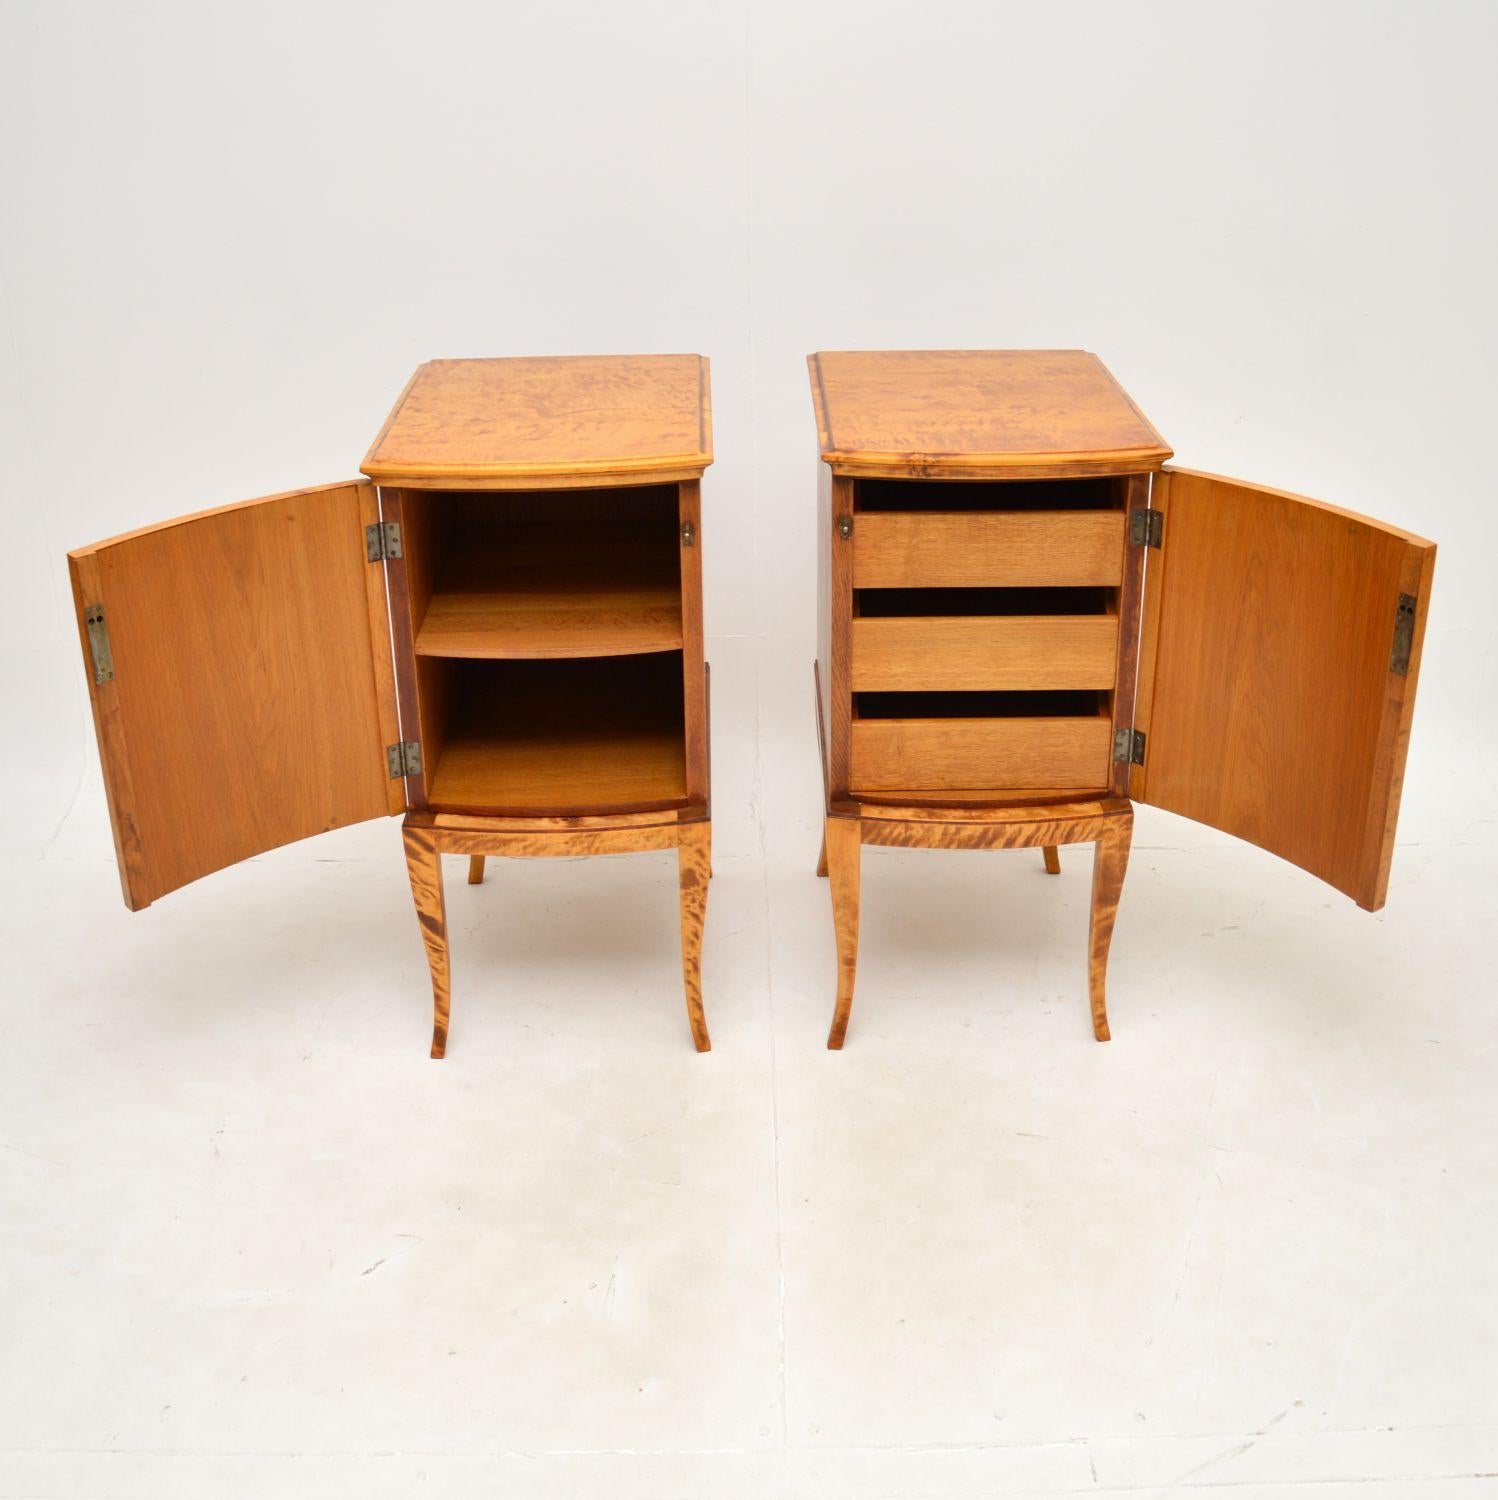 Early 20th Century Pair of Antique Swedish Satin Birch Bedside Cabinets